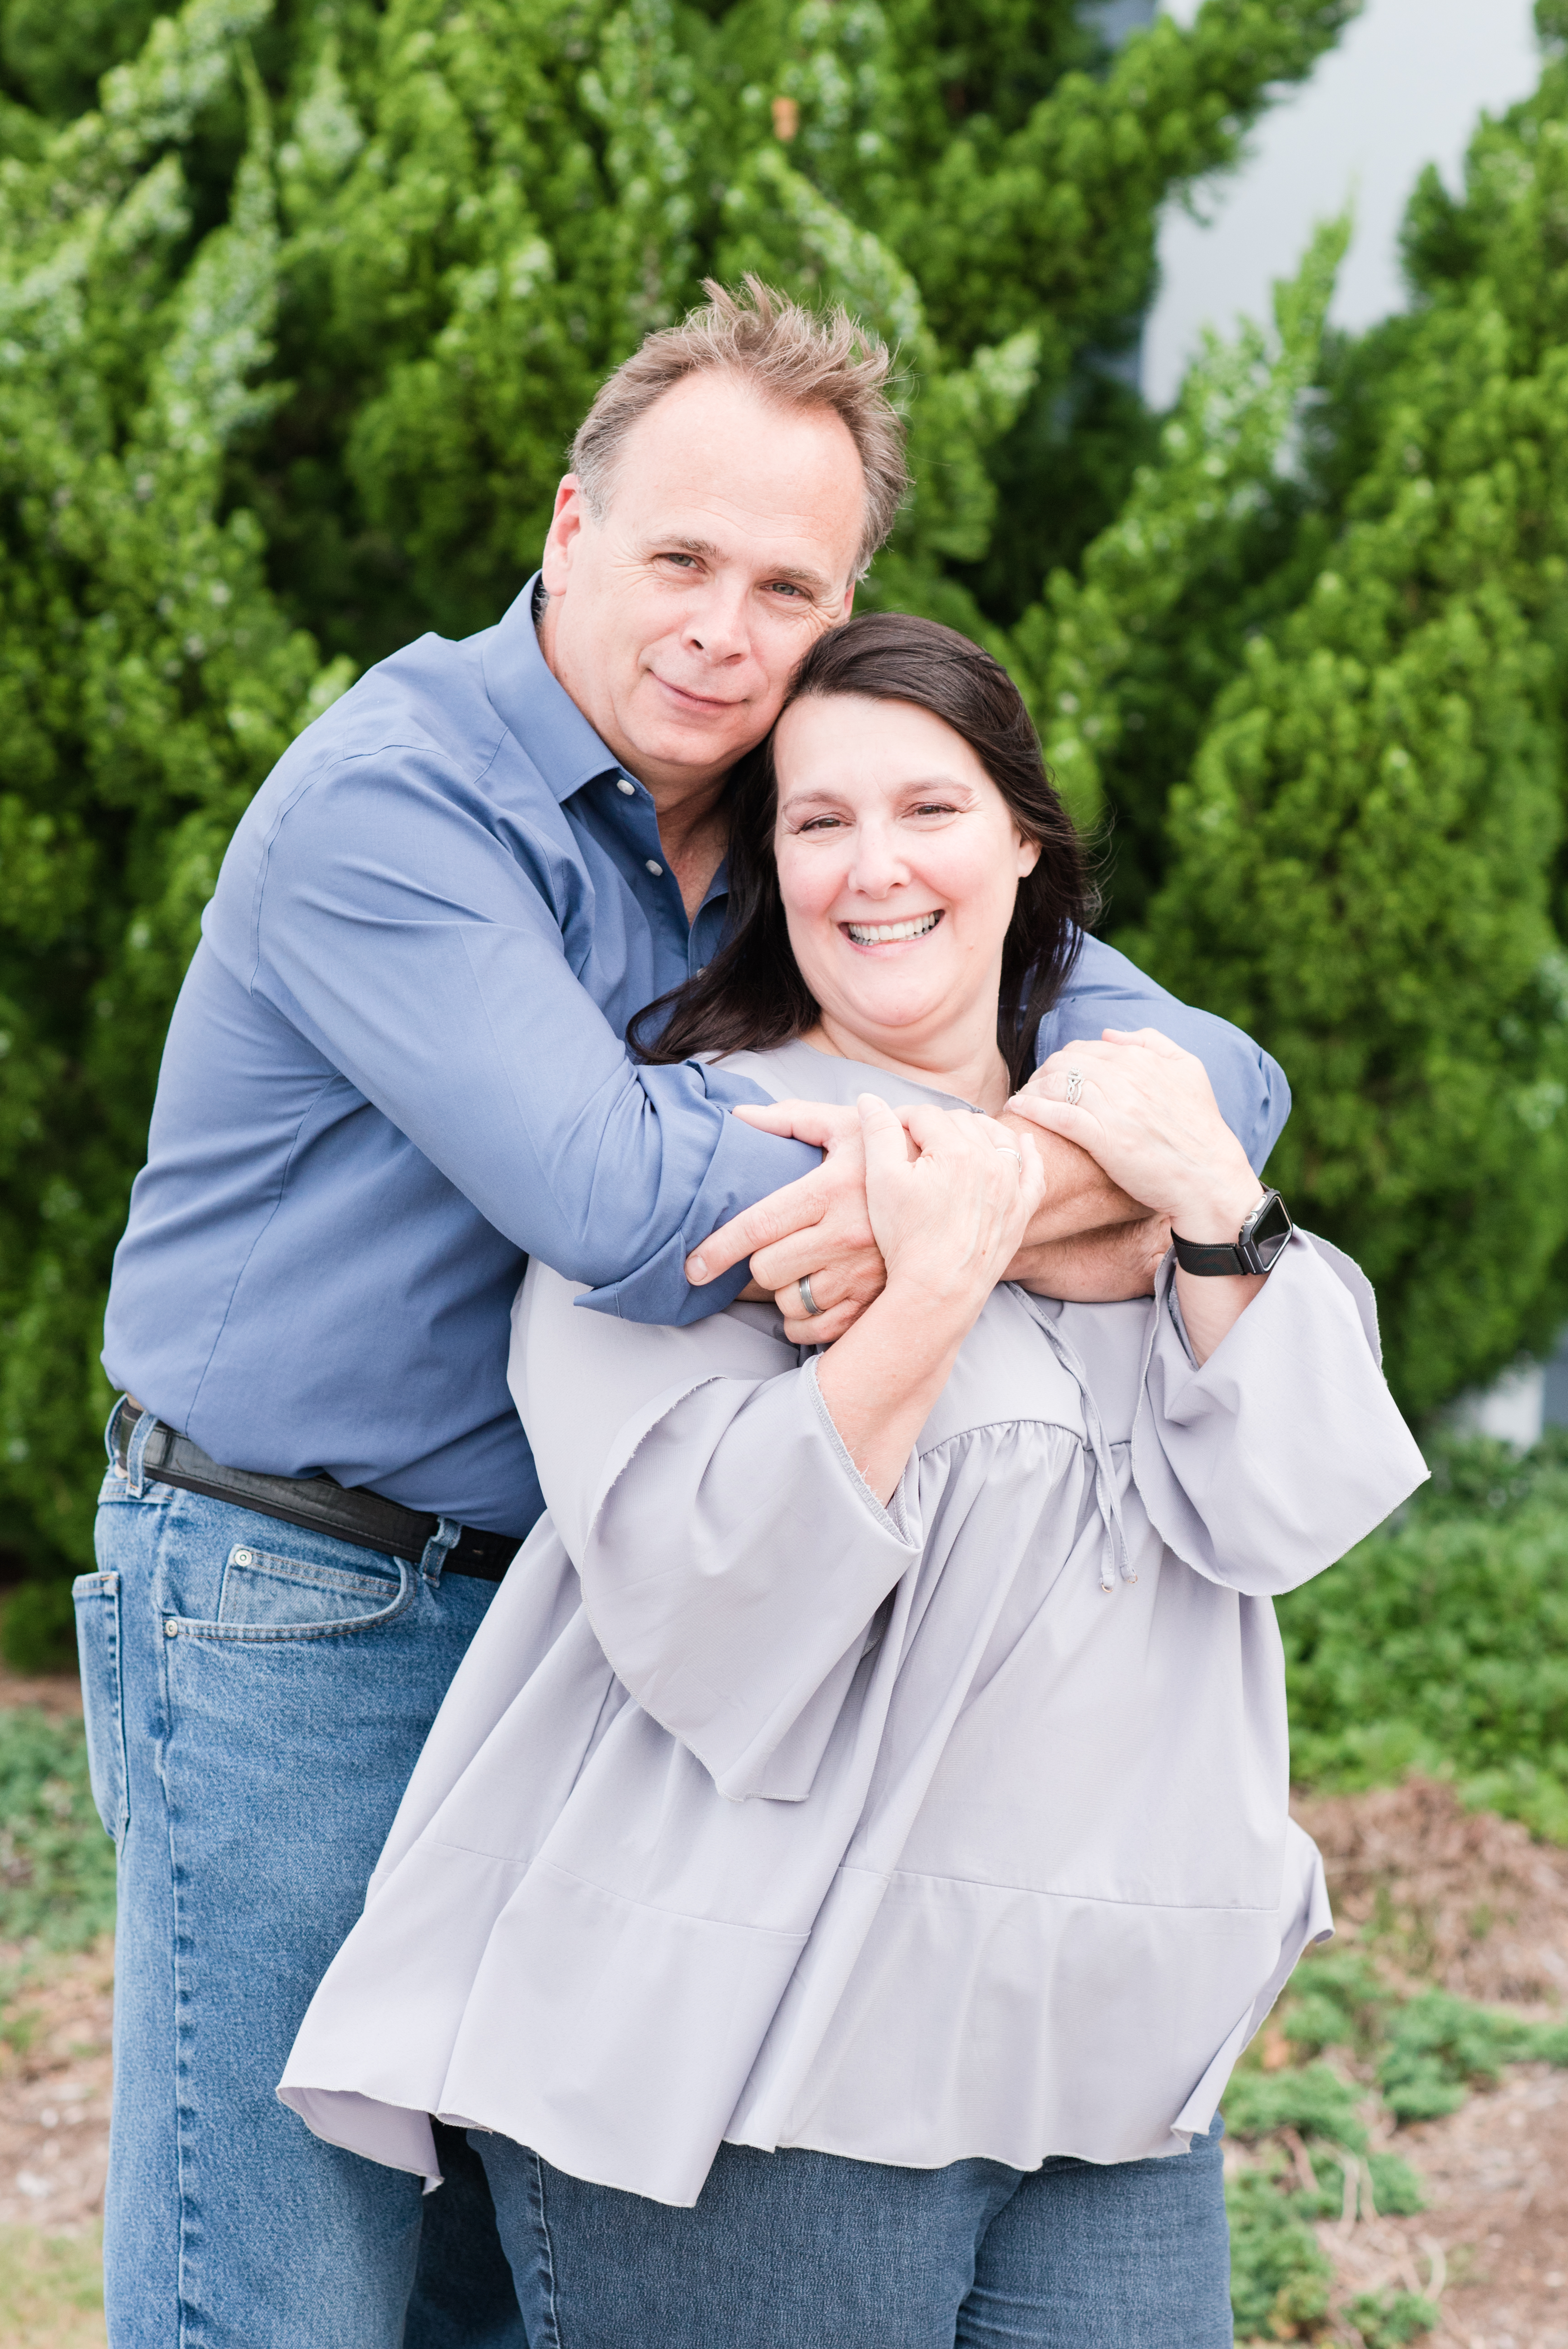 Celebrating Our Wedding Anniversaries, Michelle and Sara Photography, Mebane NC